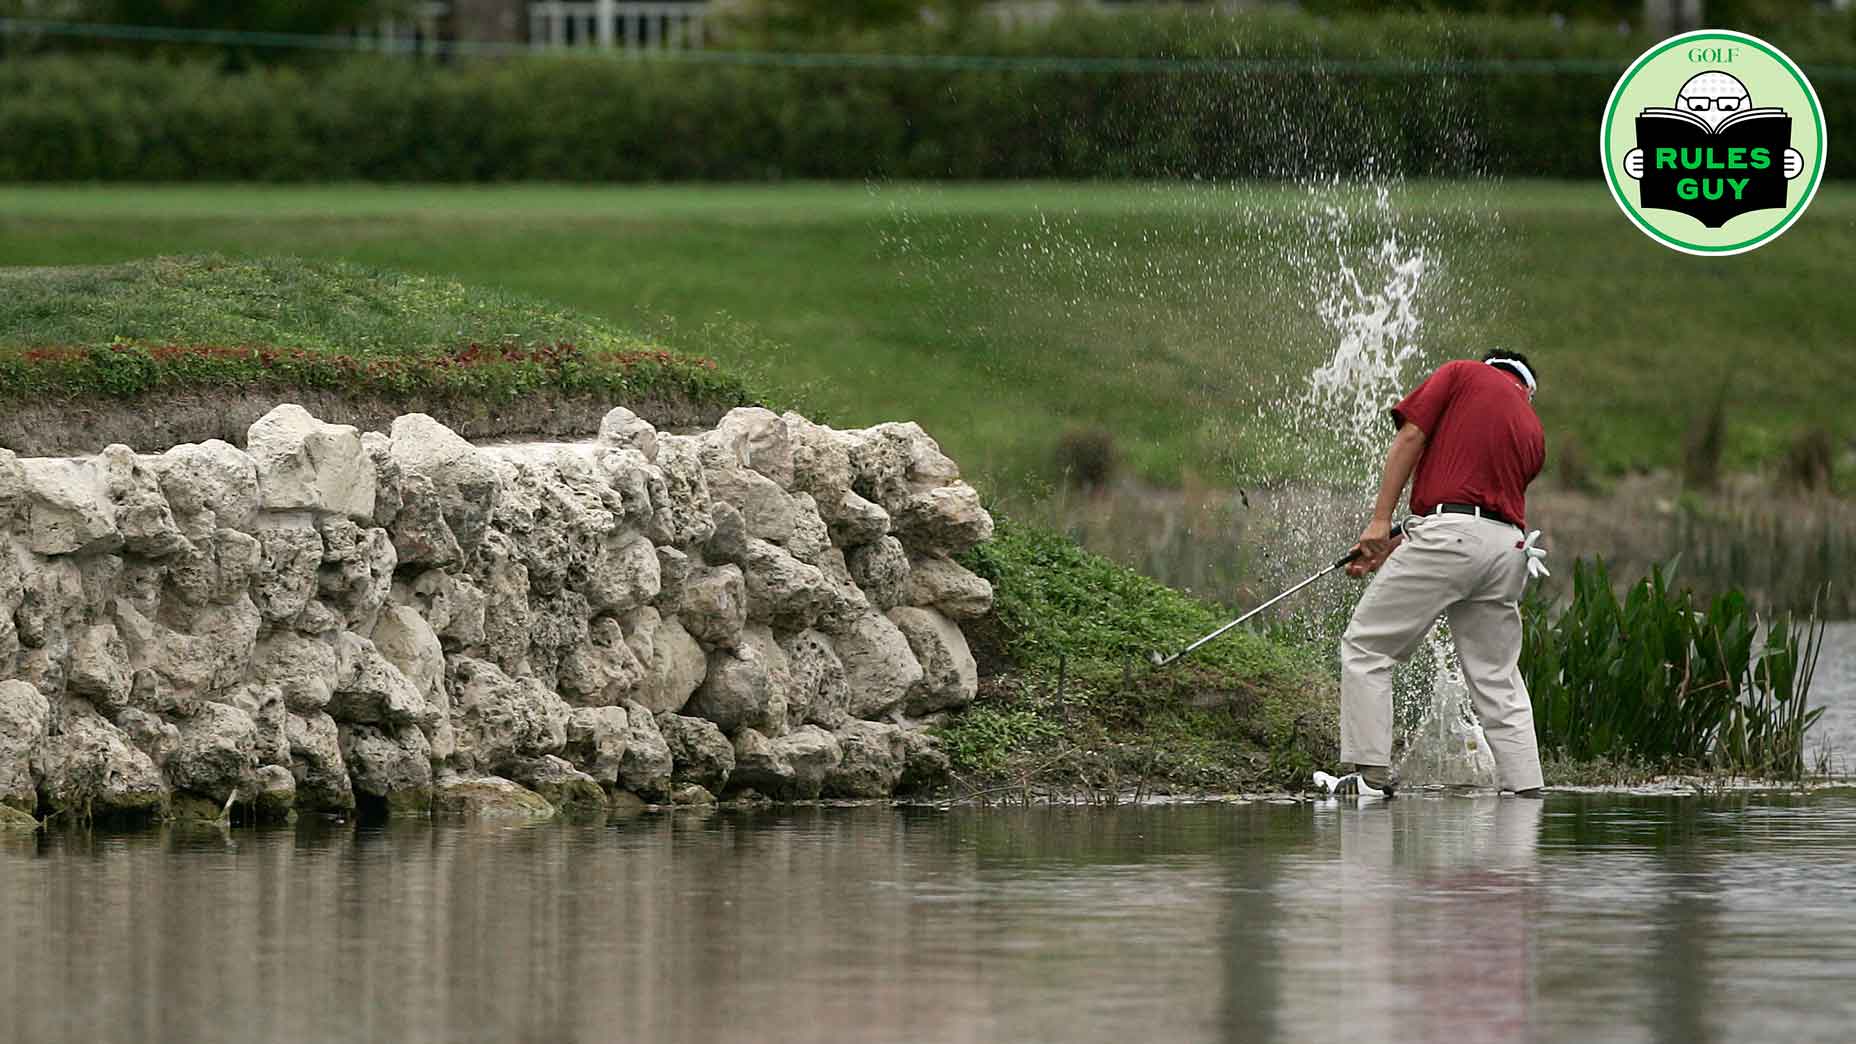 Charlie Wi hits out of a water hazard during the final round of the Honda Classic on the Champion Course at PGA National in Palm Beach Gardens, Florida on Sunday, March 4, 2007